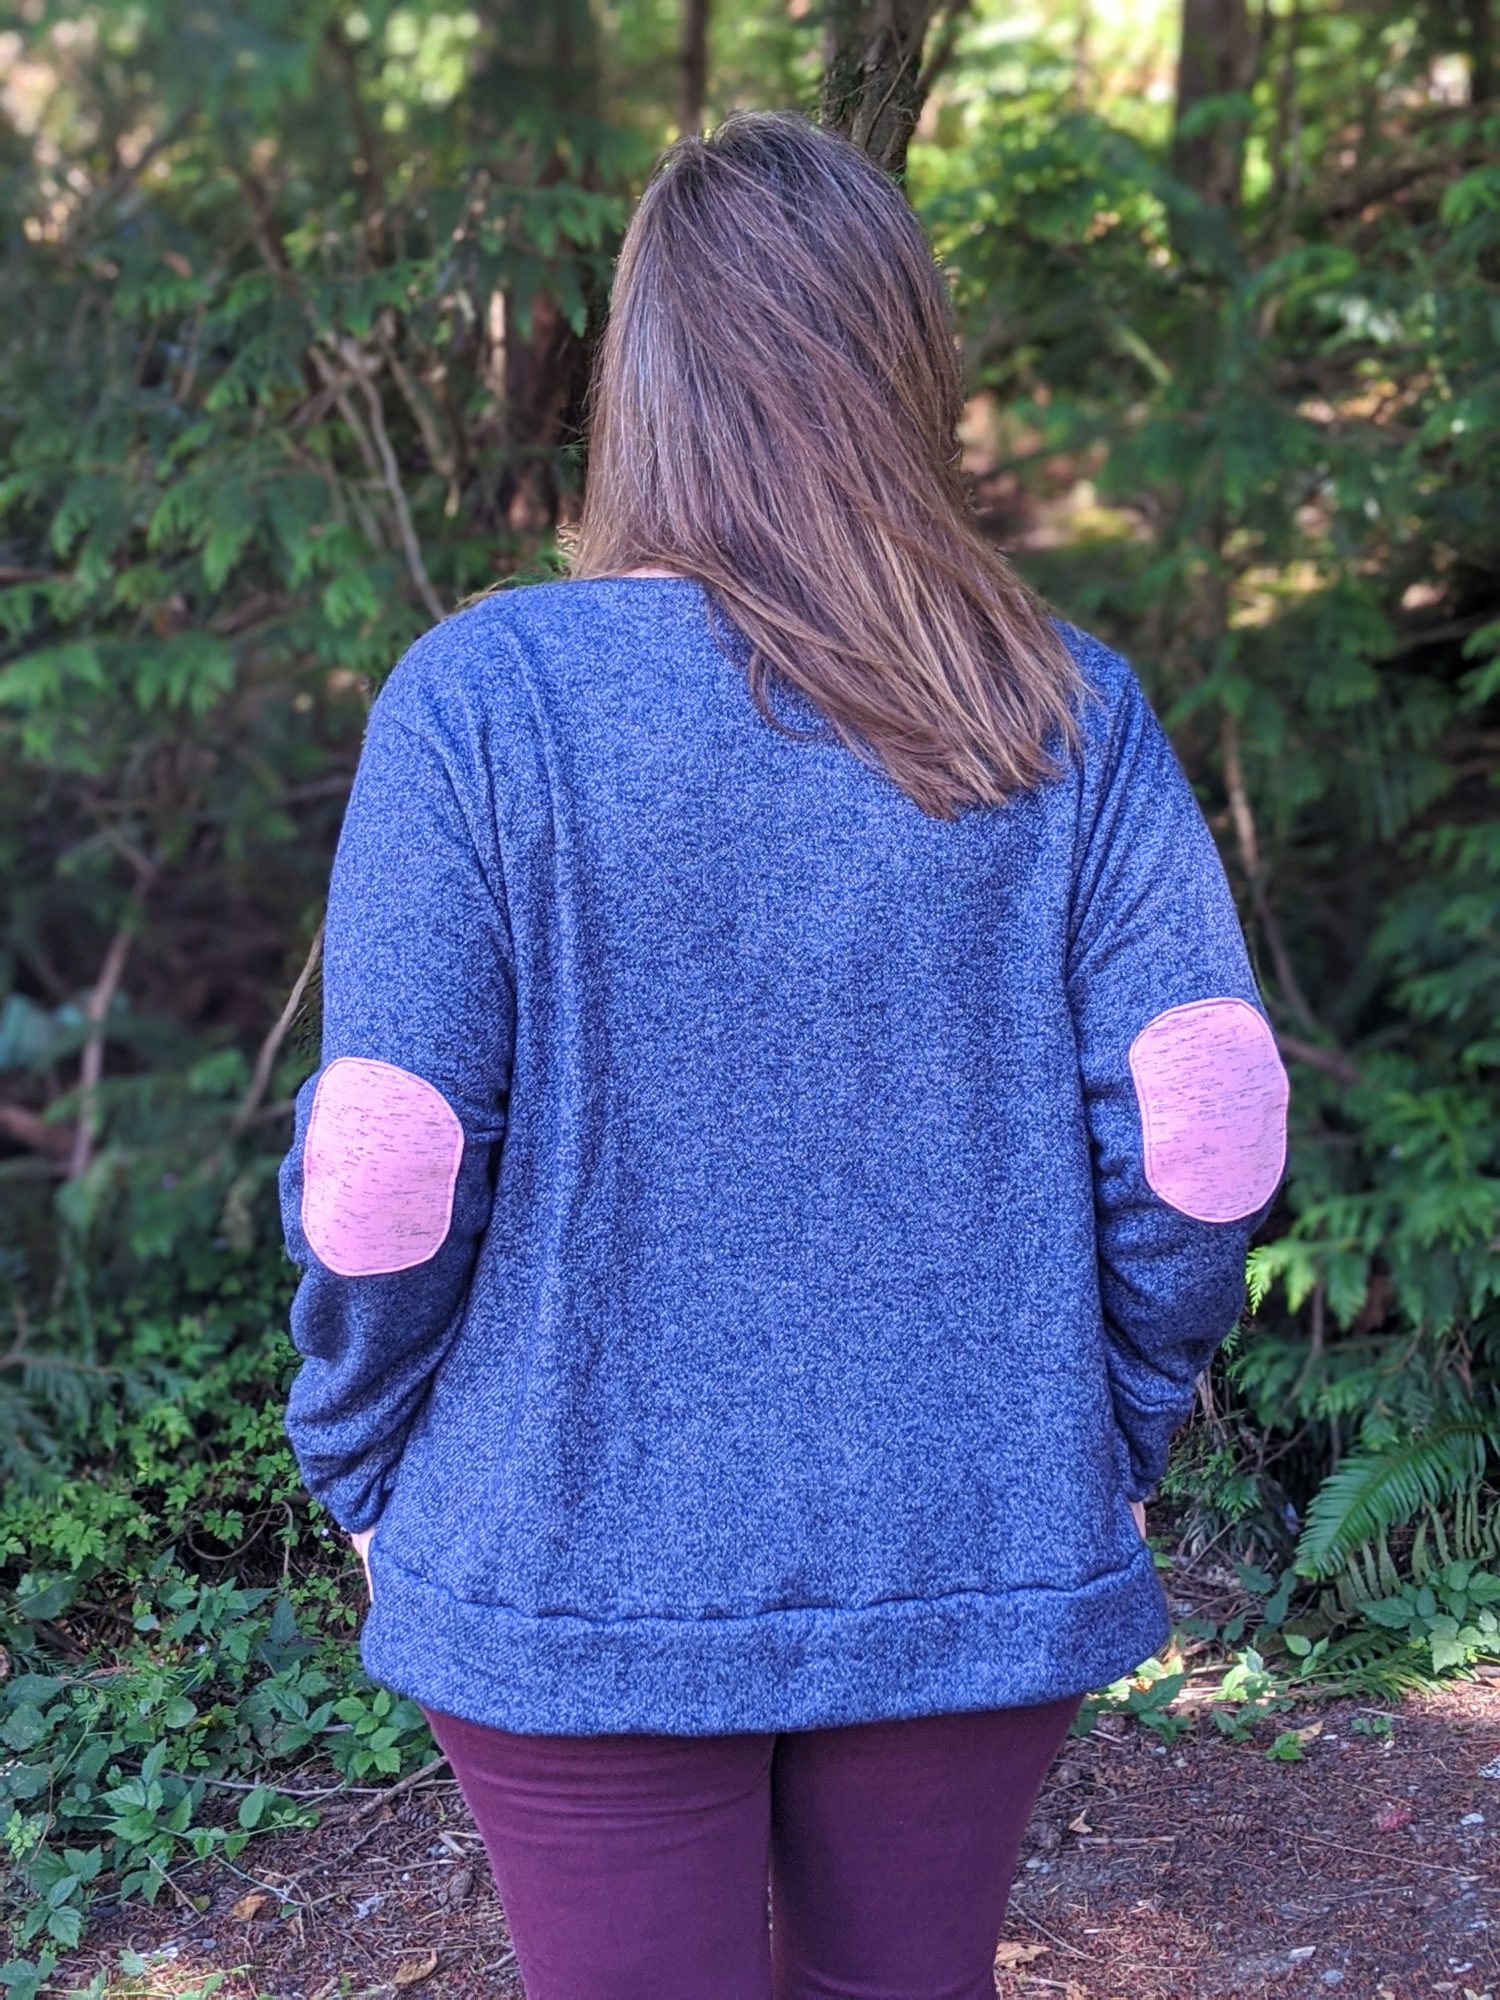 Liberty Print Elbow Patches · How To Make An Elbow Patch · Sewing